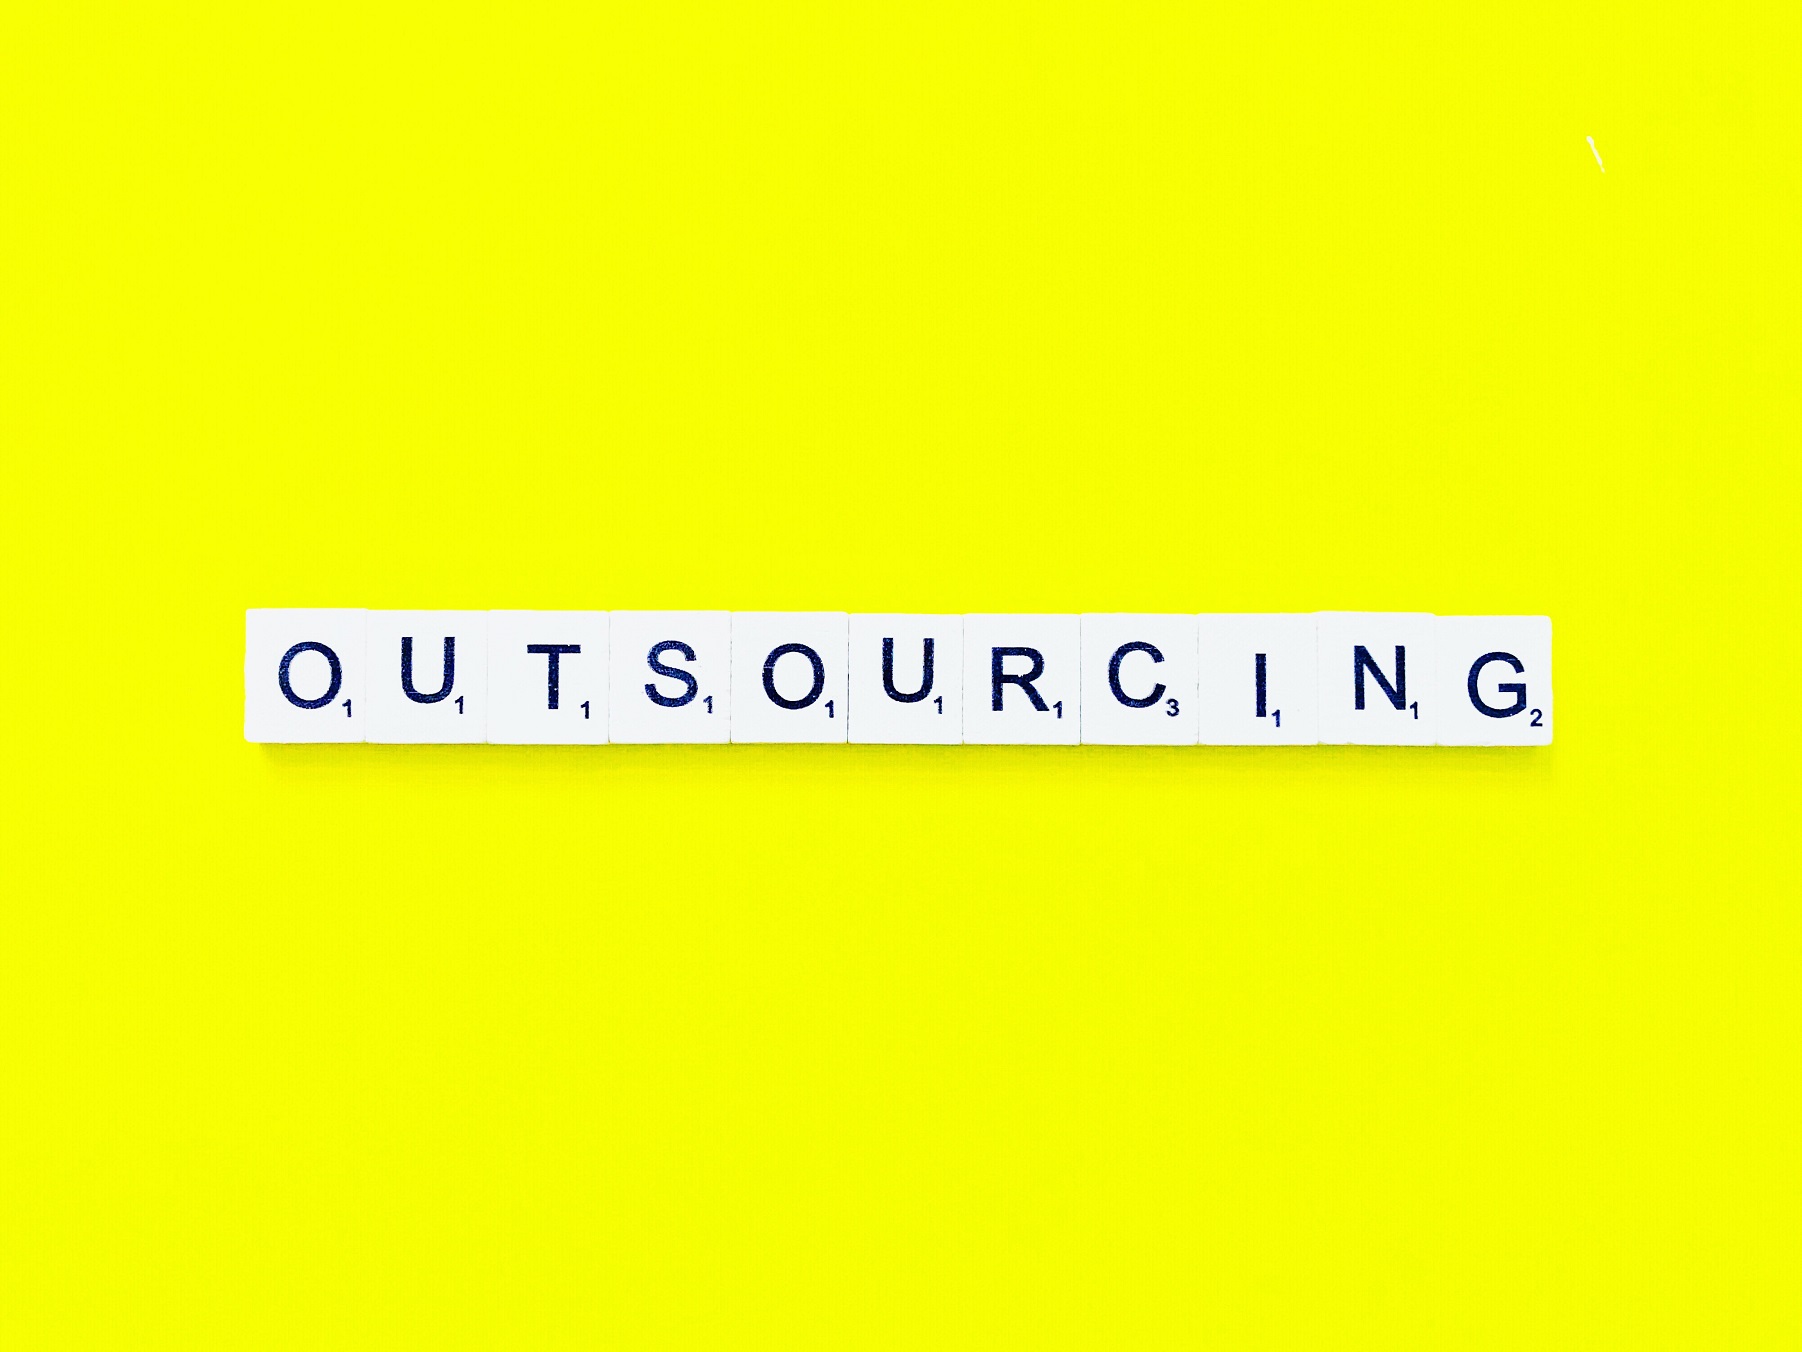 A callout about outsourcing